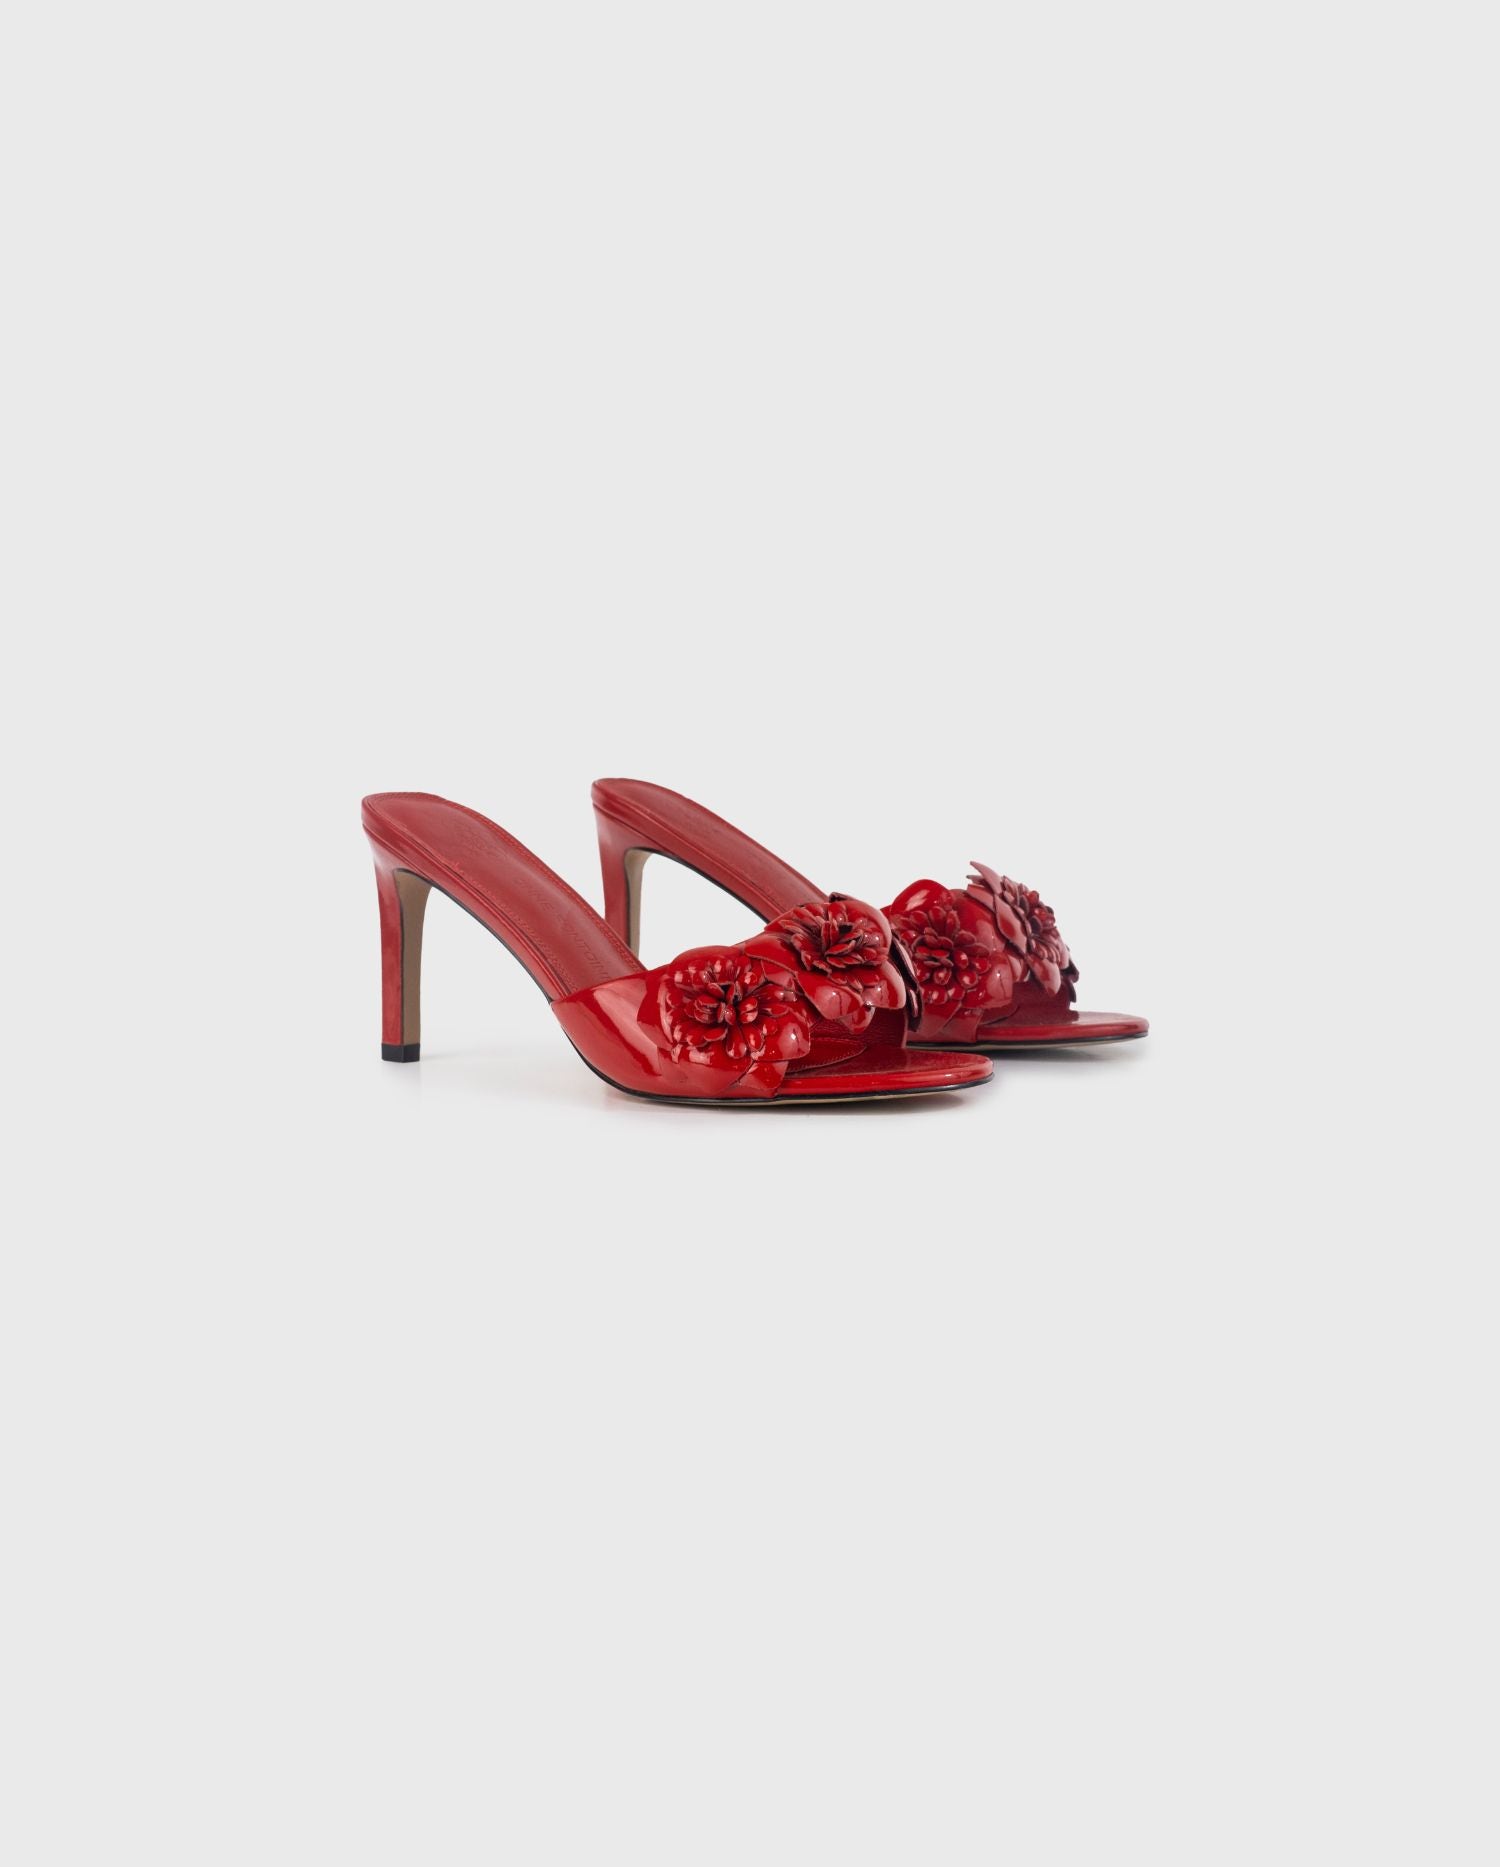 Discover the CAMILLA red patent leather slip on heel with flowers from ANNE FONTAINE